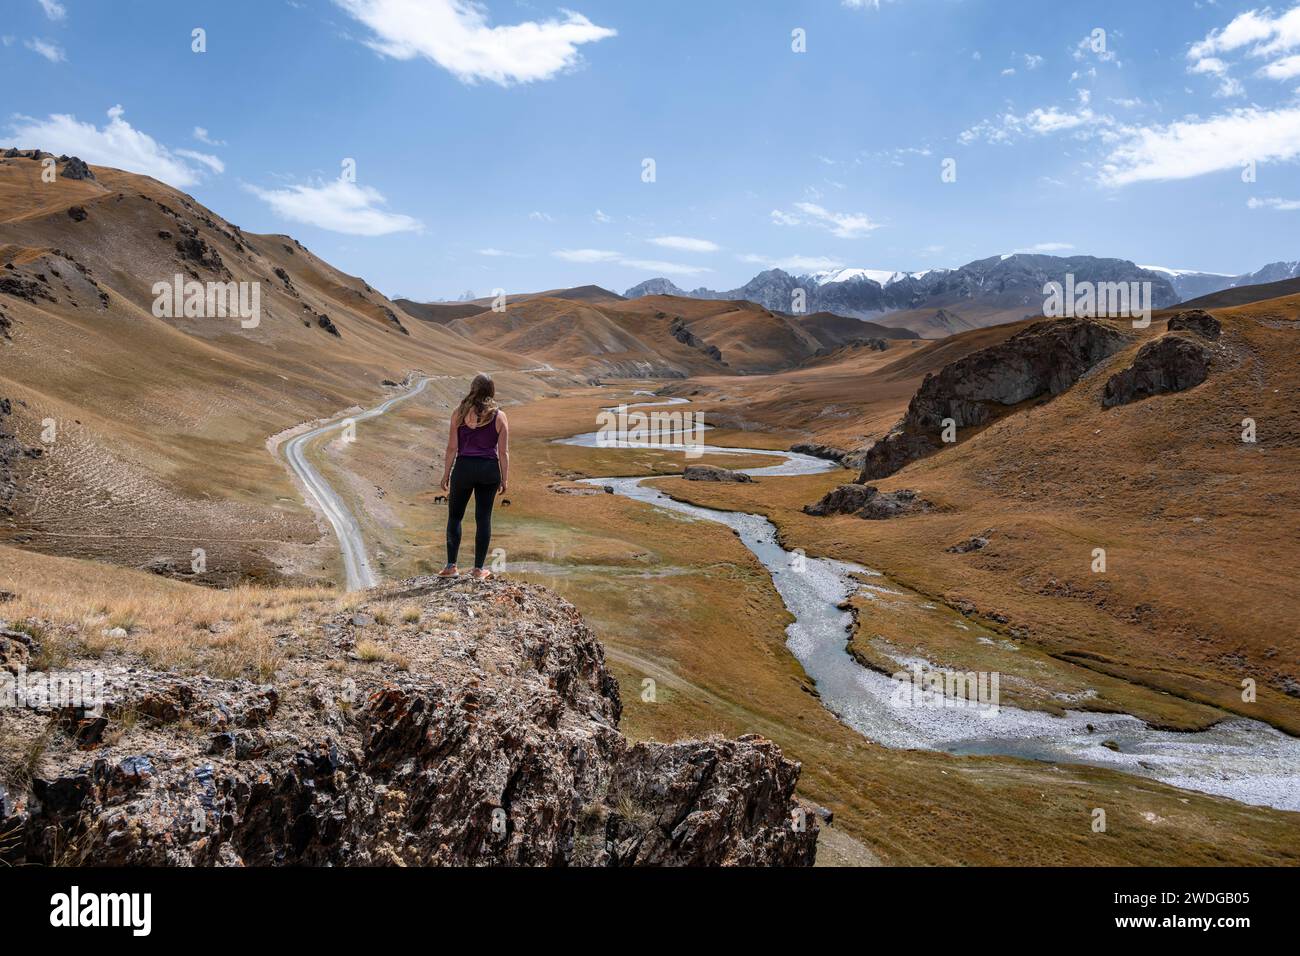 Tourist on a hill, Kol Suu river winds through a mountain valley with hills of yellow grass, Naryn province, Kyrgyzstan Stock Photo